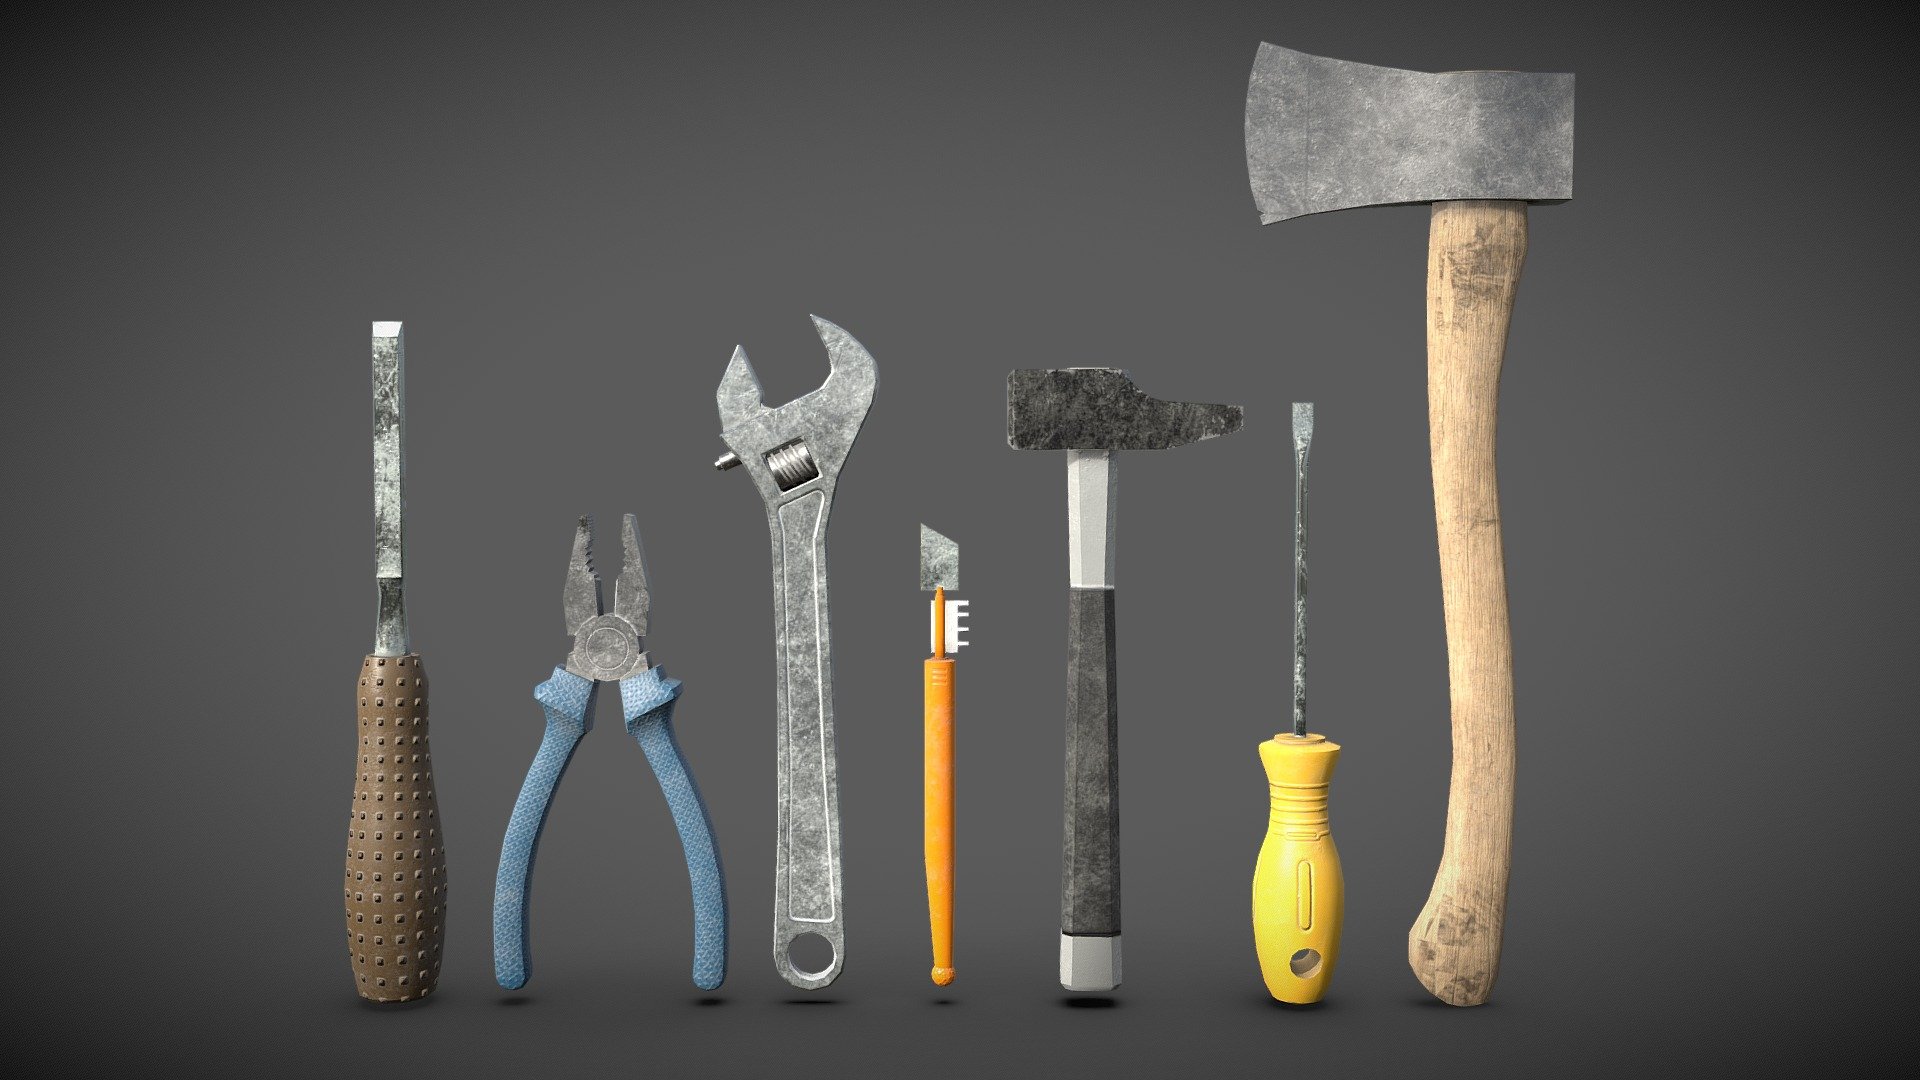 Basic tools, low poly gameready assets with 2K  PBR textures, ready to be implemeted in your game/scene.
Contain seven tools 3d model